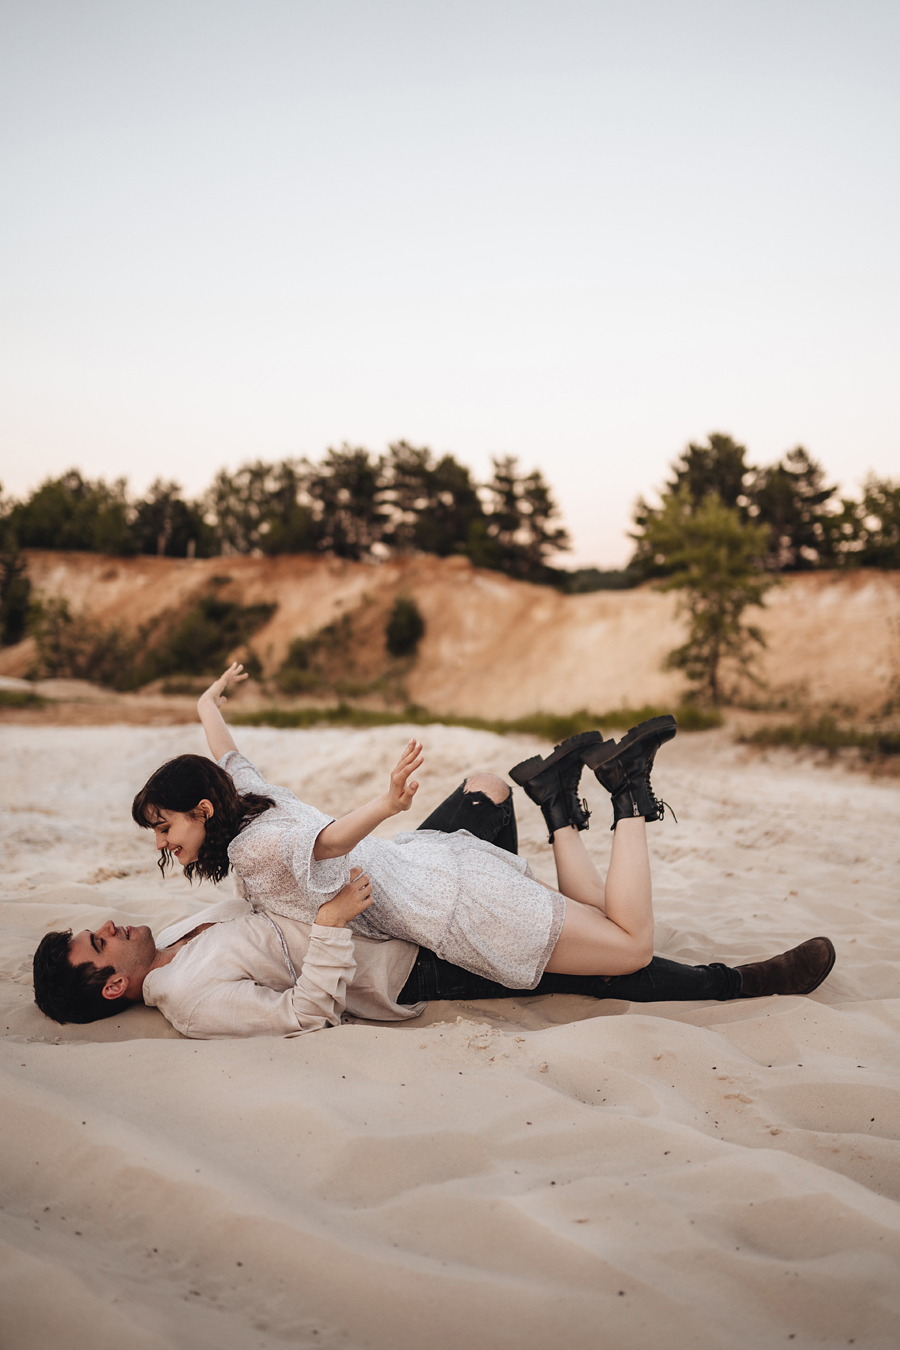 cute & simple couple pic ideas 📸🌺 | Gallery posted by Maria Fern 🌿 |  Lemon8